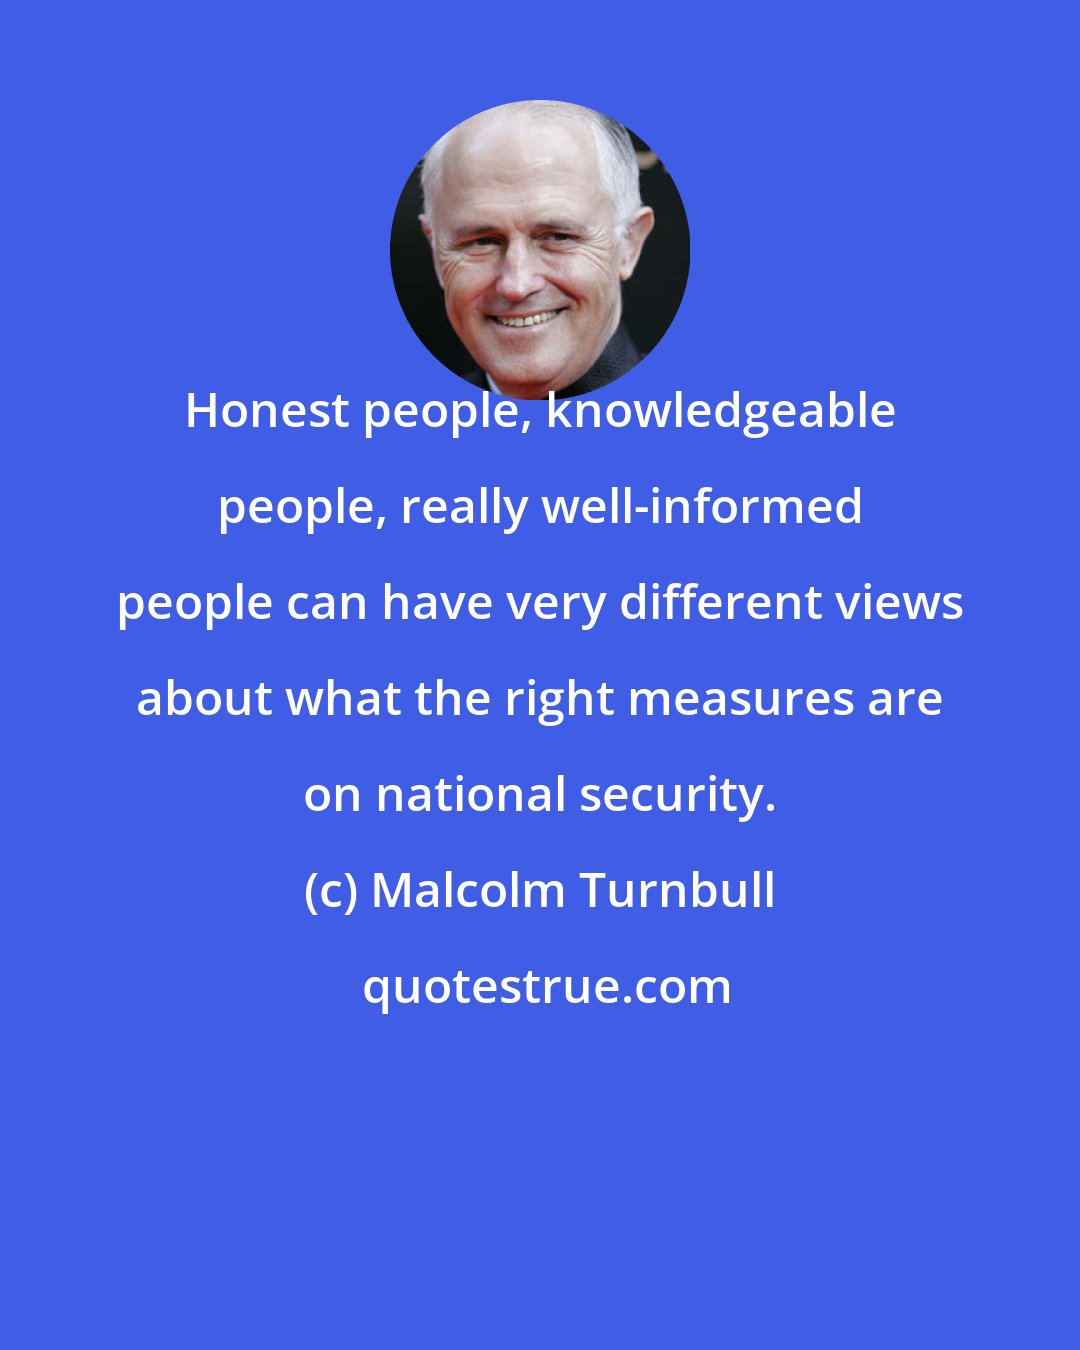 Malcolm Turnbull: Honest people, knowledgeable people, really well-informed people can have very different views about what the right measures are on national security.